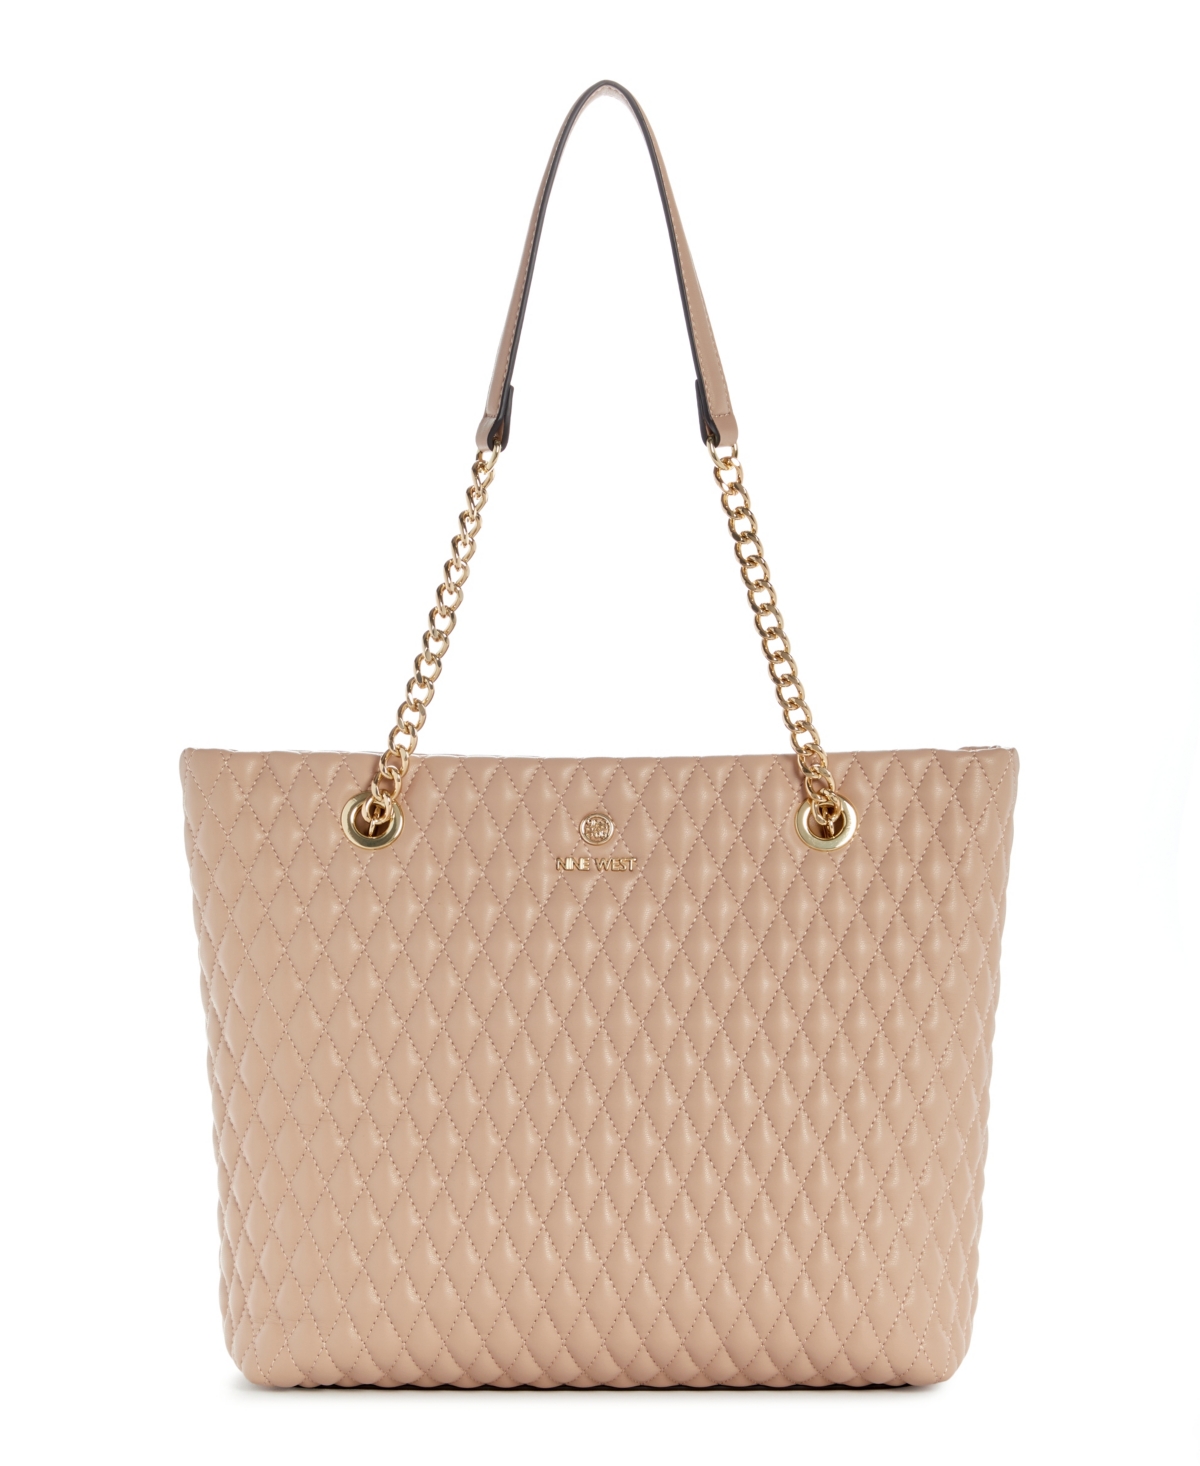 Nine West Women's Caelia Tote In Barely Nude